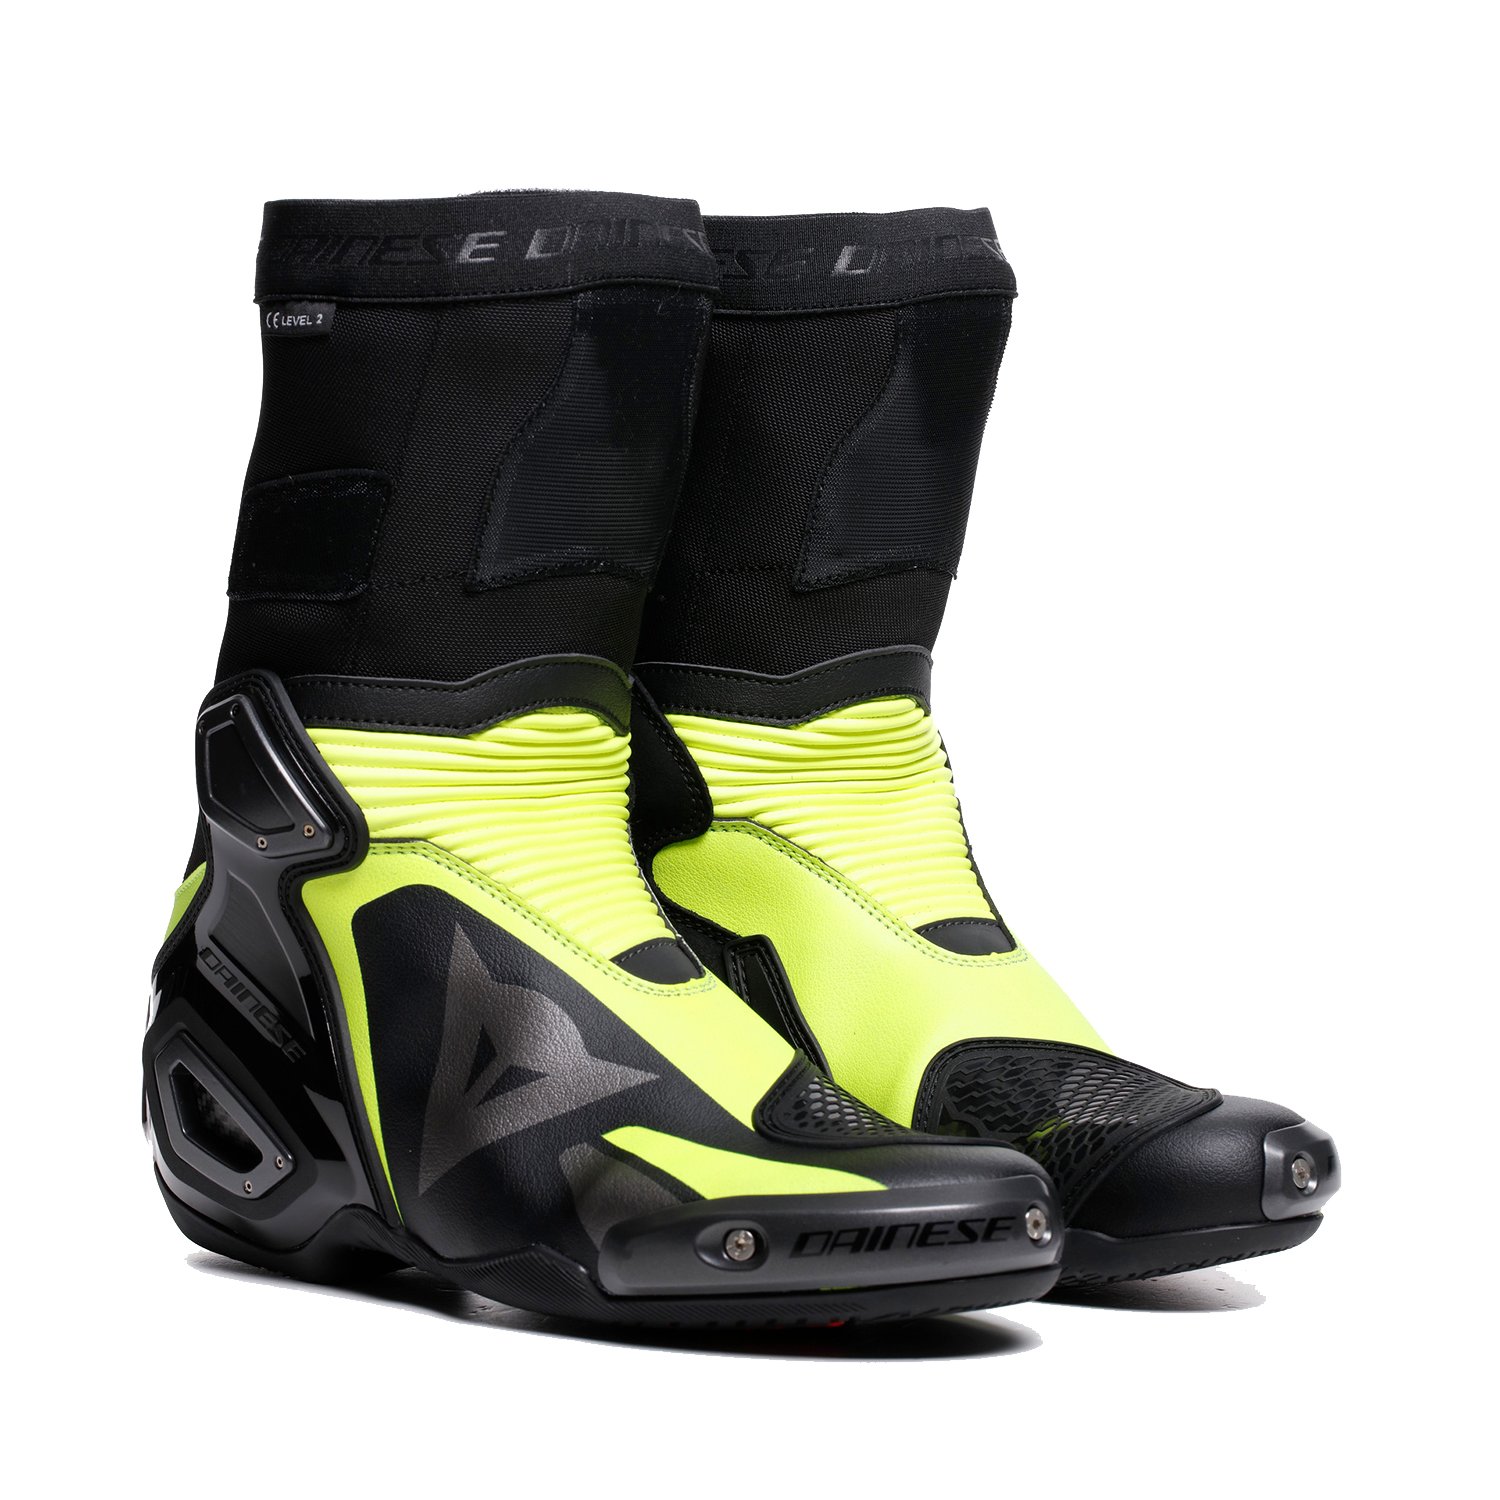 Image of Dainese Axial 2 Boots Black Yellow Fluo Größe 44